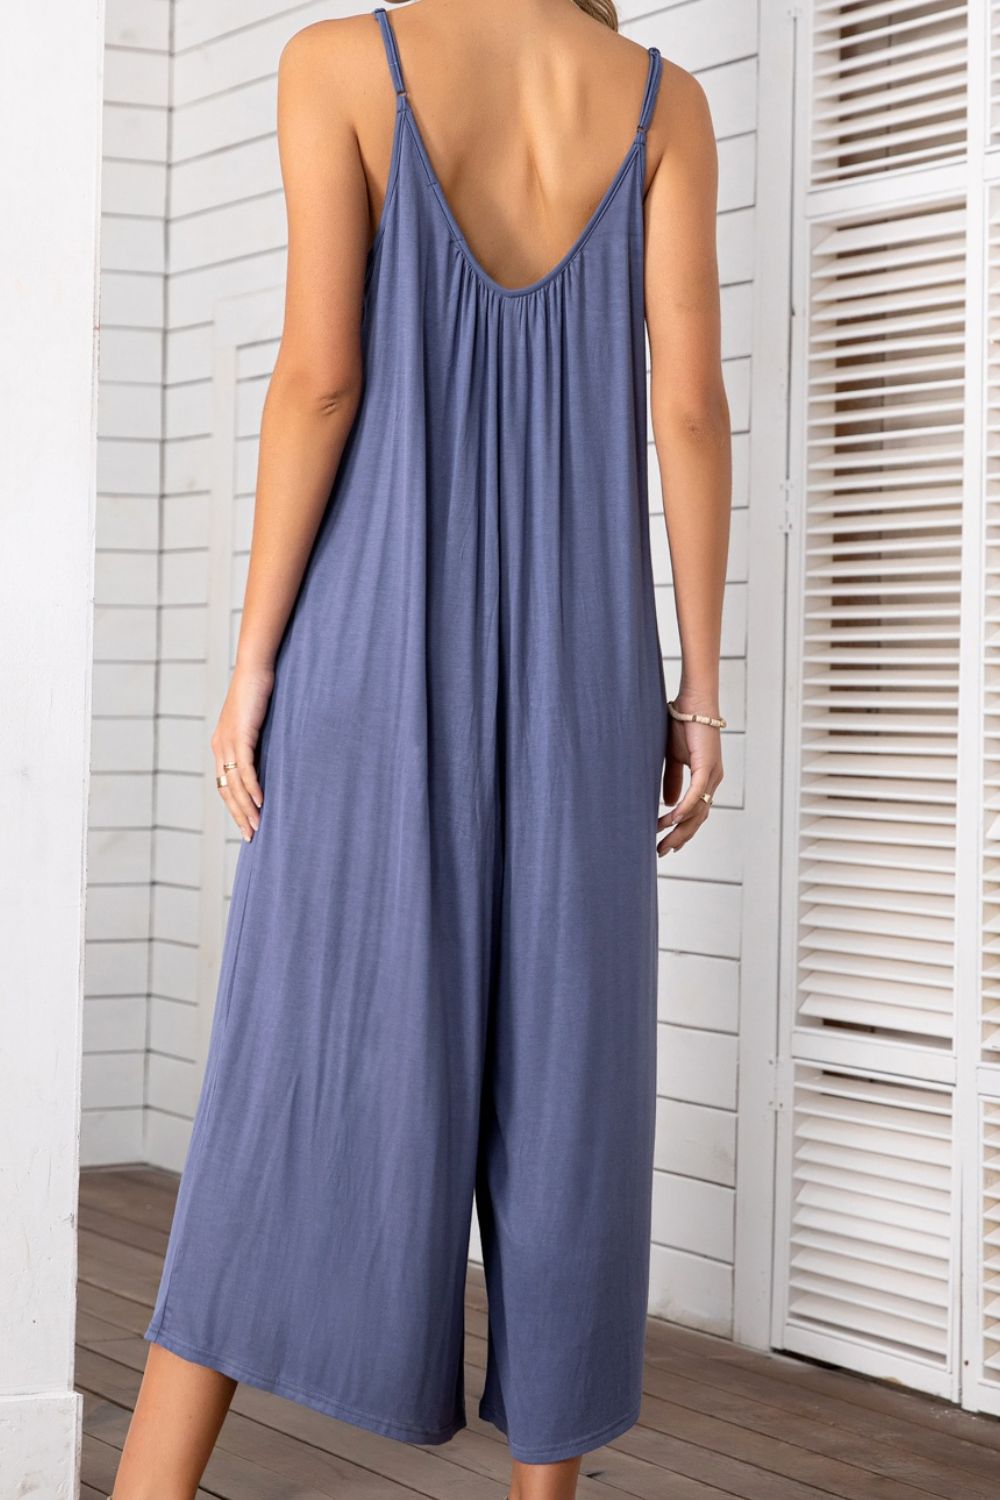 Back View, Spaghetti Strap Scoop Neck Jumpsuit In Periwinkle